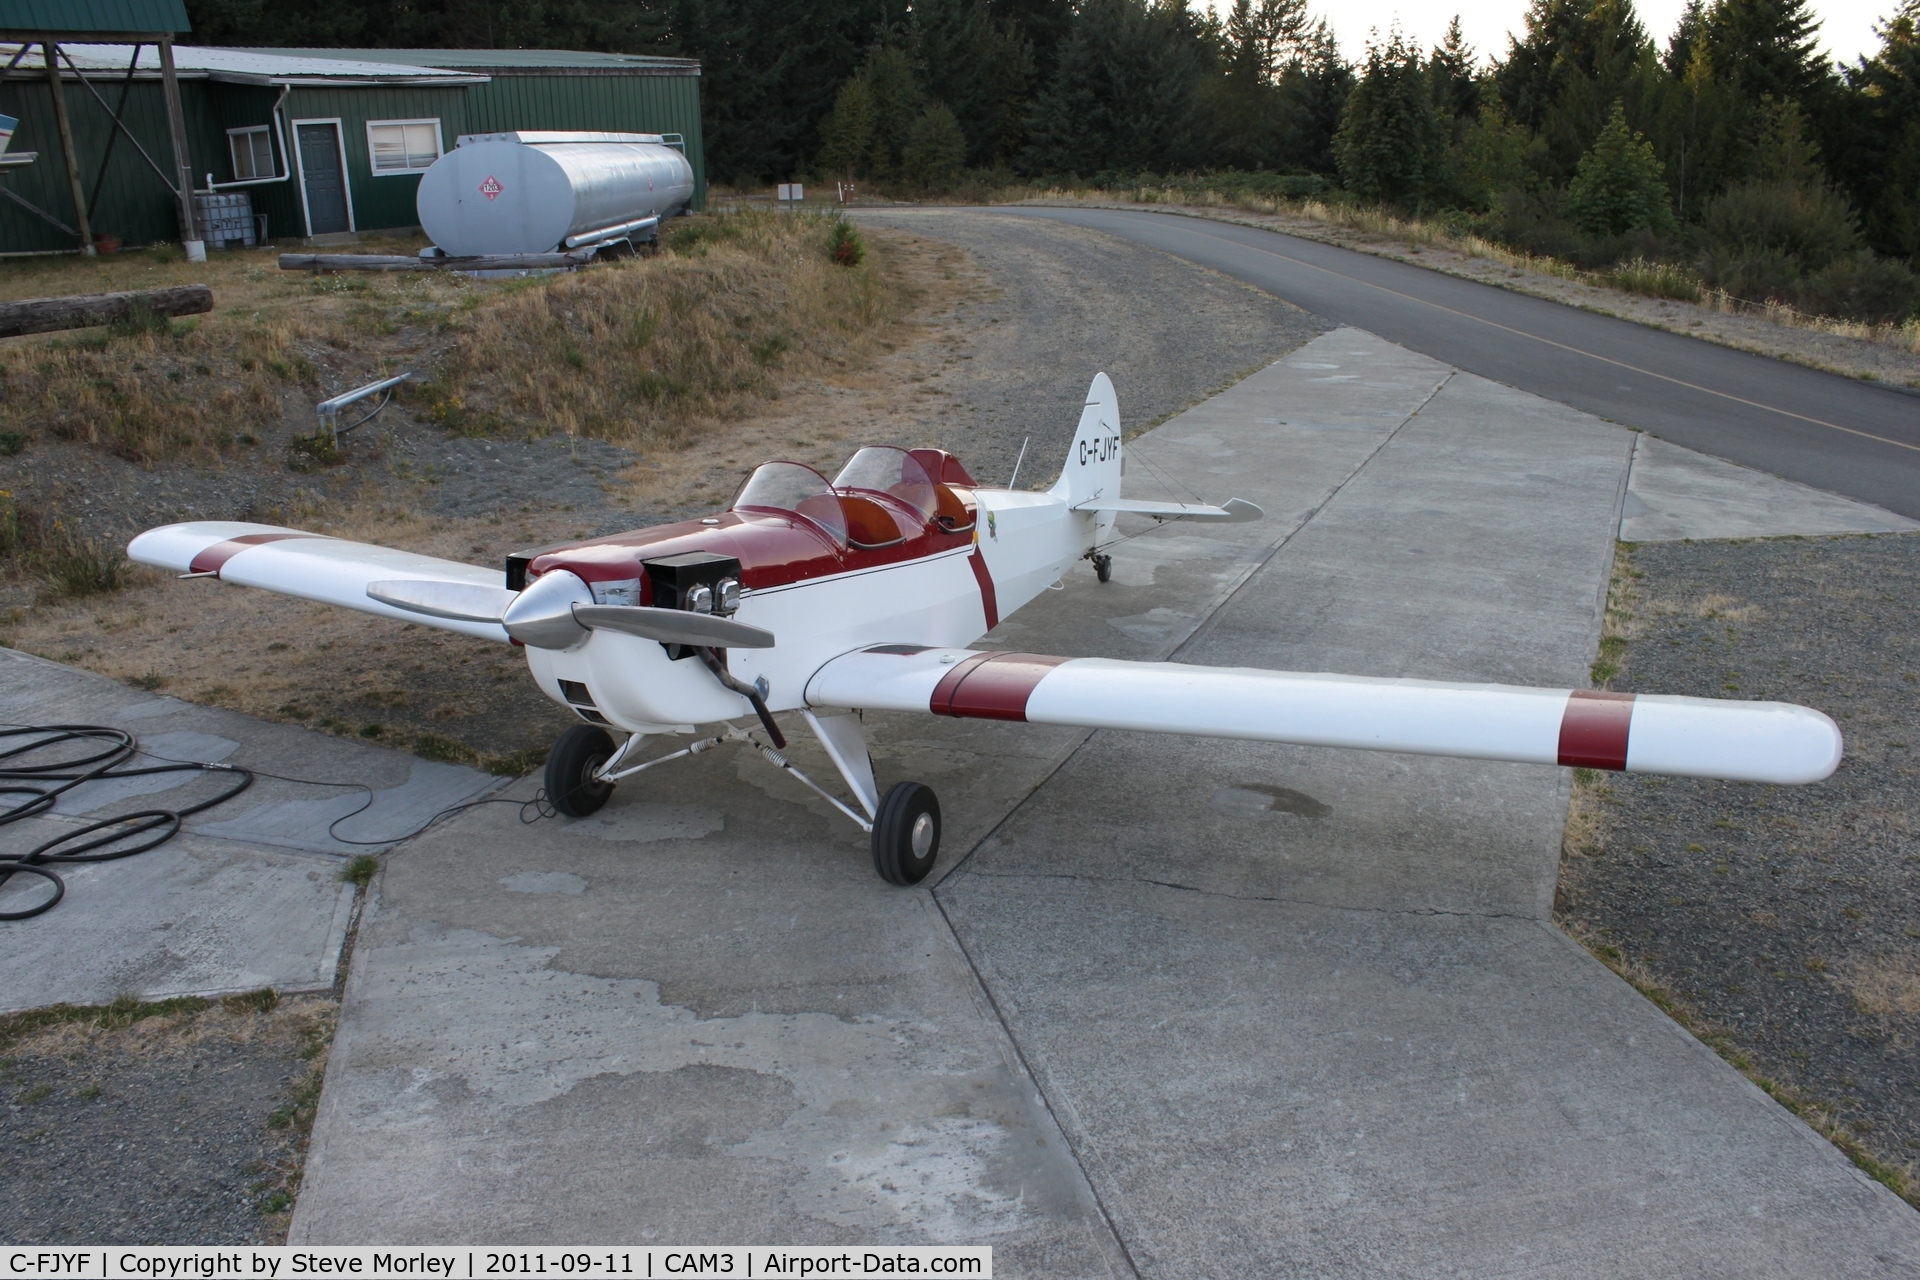 C-FJYF, 1992 Anglin Spacewalker II C/N DWR-4, At it's new home with the new owners...